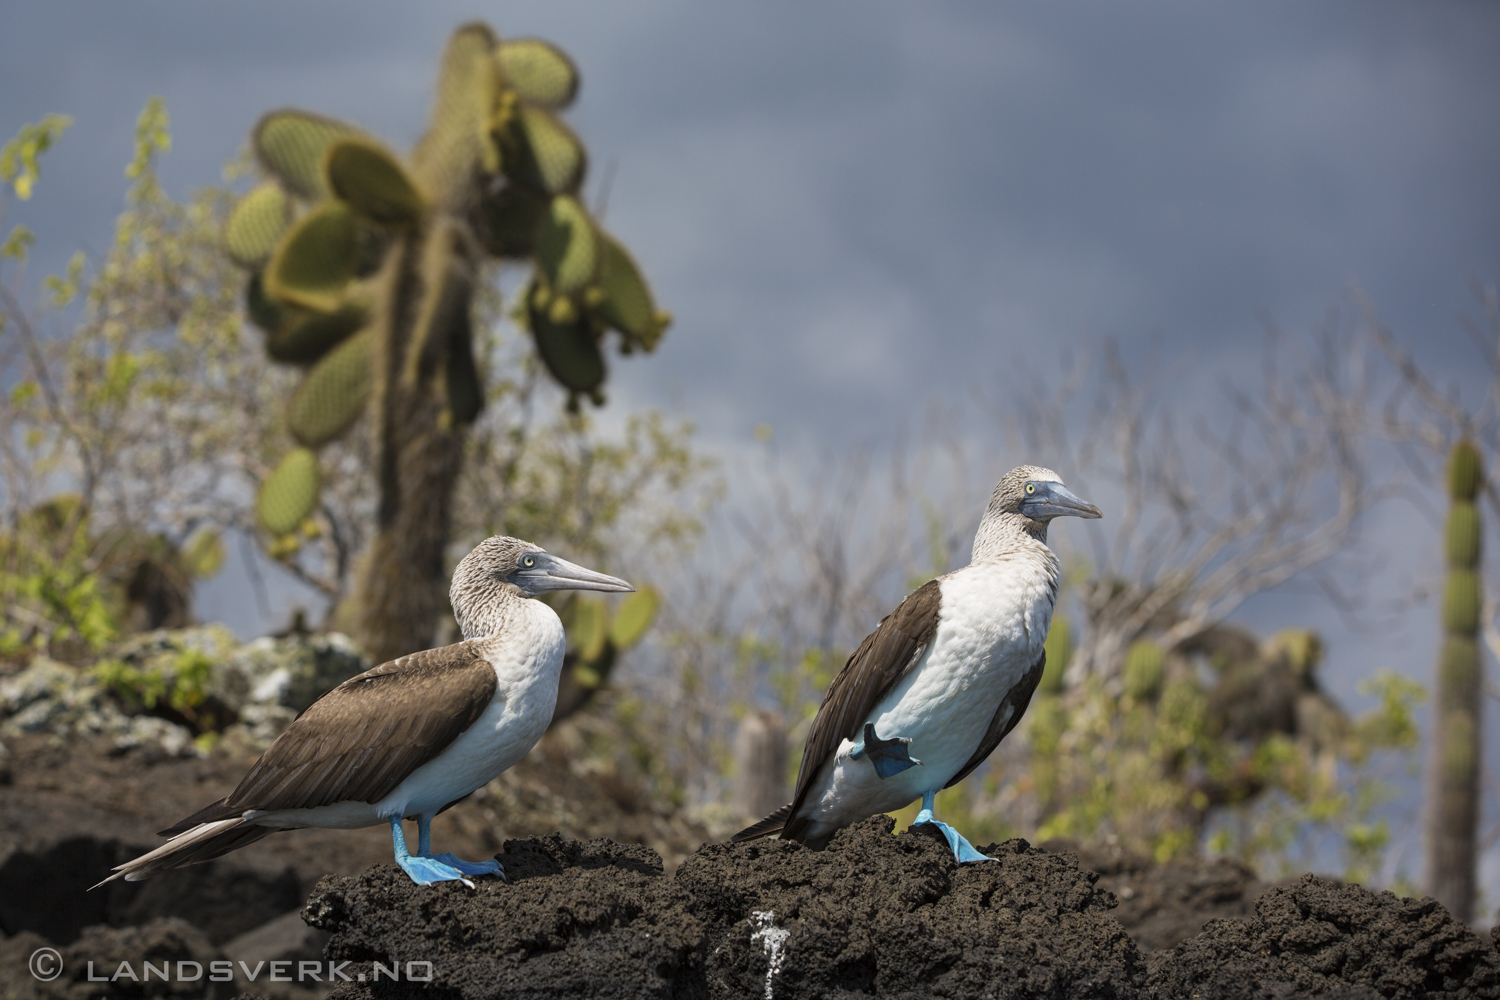 Wild Blue Footed Boobies doing their dancing, Eden, Galapagos. 

(Canon EOS 5D Mark III / Canon EF 70-200mm f/2.8 L IS II USM)